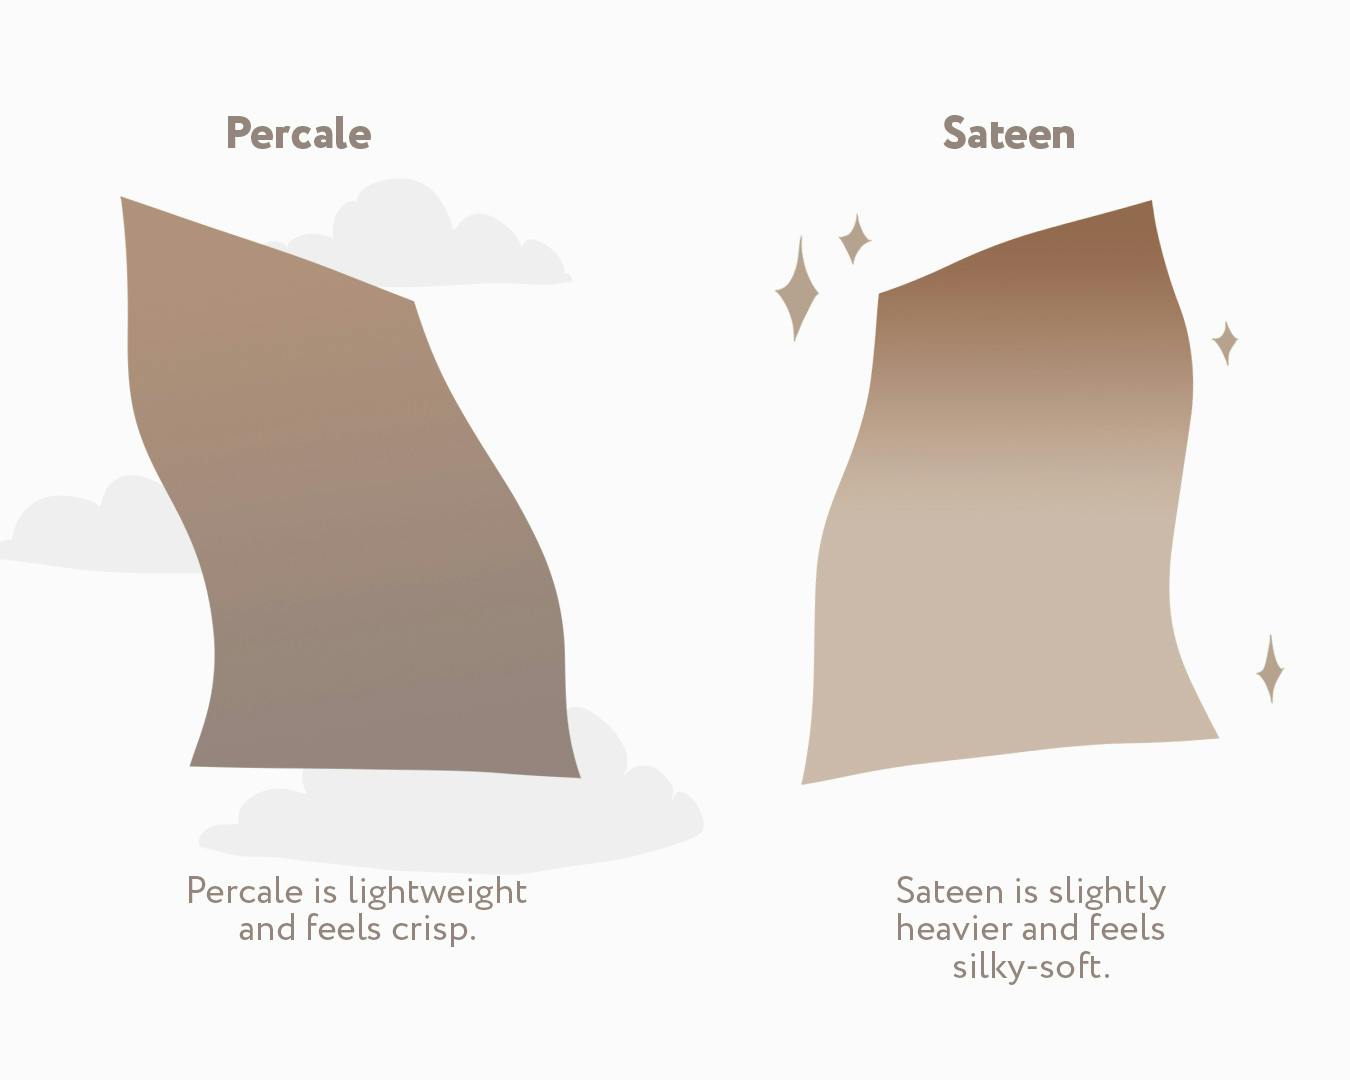 illustration showing the differences between percale vs sateen sheets